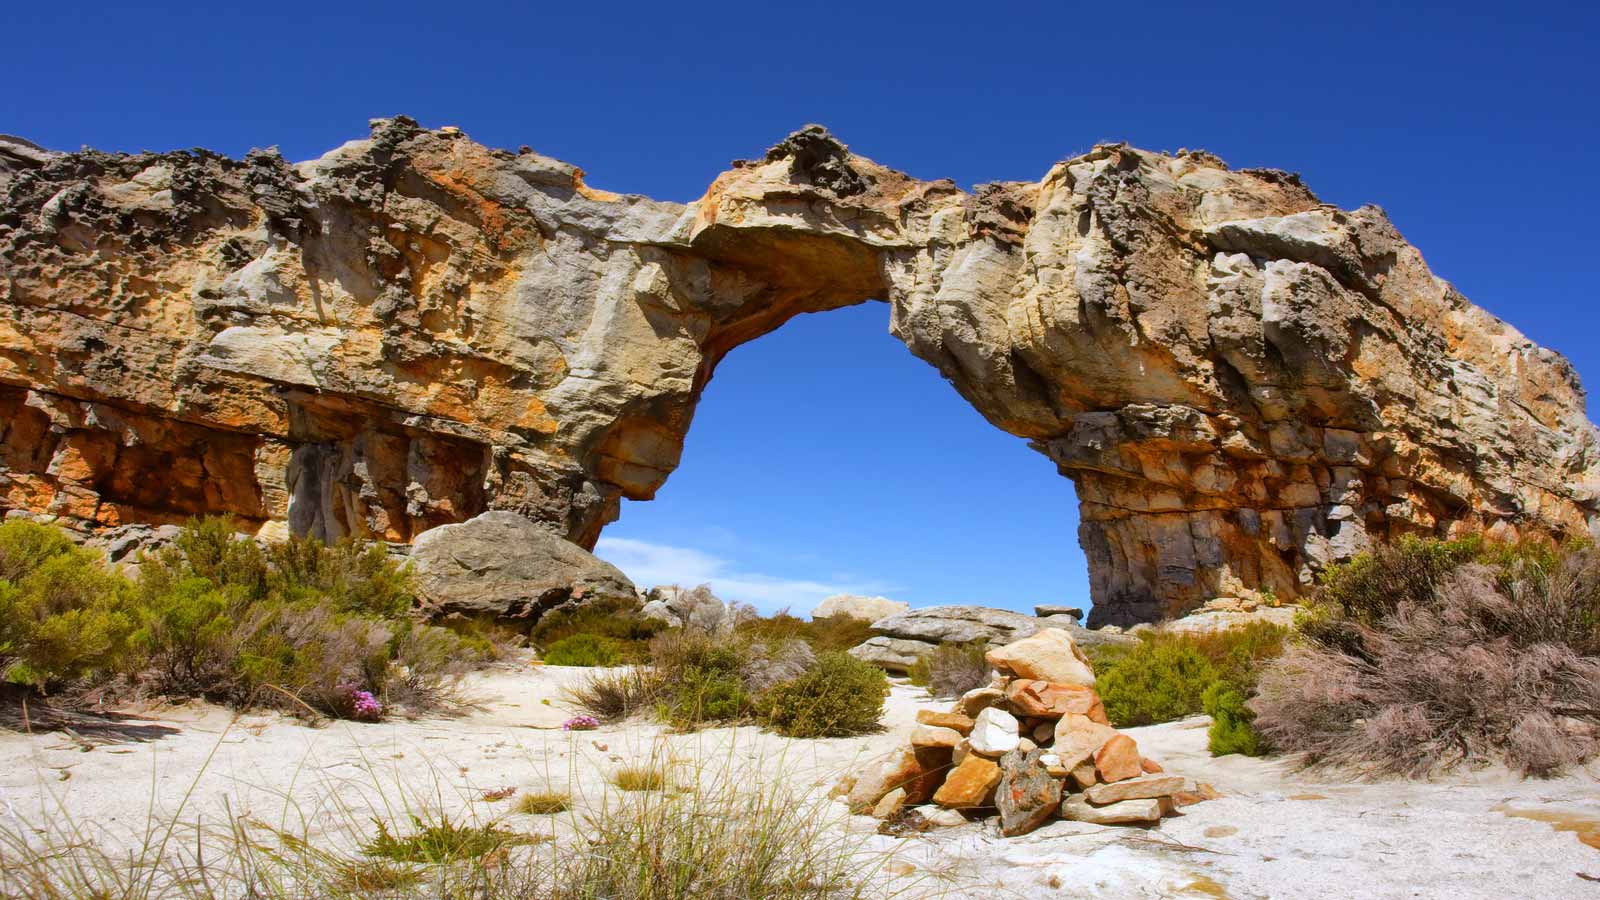 <p>The Cederberg is another adventurer’s paradise. Hike to the Wolfberg Arch and soak in uninterrupted views of the Milky Way. The unique rock formations and San rock art make this region of the Western Cape a popular destination for locals and tourists. </p><p>Have fun visiting this incredible country — a place I call home.</p><p>Images courtesy of <a href="https://depositphotos.com/" rel="nofollow noopener">Depositphotos.com</a>.</p><p>Follow The Happiness Function on <a href="https://twitter.com/thehappinessfxn" rel="nofollow noopener">Twitter</a>, <a href="https://www.instagram.com/thehappinessfxn/" rel="nofollow noopener">Instagram</a>, <a href="https://www.facebook.com/thehappinessfxn/" rel="nofollow noopener">Facebook</a>, <a href="https://www.tiktok.com/@thehappinessfxn" rel="nofollow noopener">TikTok</a> and <a href="https://www.youtube.com/channel/UCYXMvMbJekTvubxhq0GdPlA" rel="nofollow noopener">YouTube</a>.</p><p><strong>More Articles From The Happiness Function:</strong></p><ul> <li><a href="https://thehappinessfxn.com/things-to-do-in-colorado/">15 Epic Outdoorsy Things To Do in Colorado</a></li> <li><a href="https://thehappinessfxn.com/best-all-inclusive-resorts-near-playa-del-carmen/">10 Dreamy All-Inclusive Resorts Near Playa del Carmen</a></li> </ul>